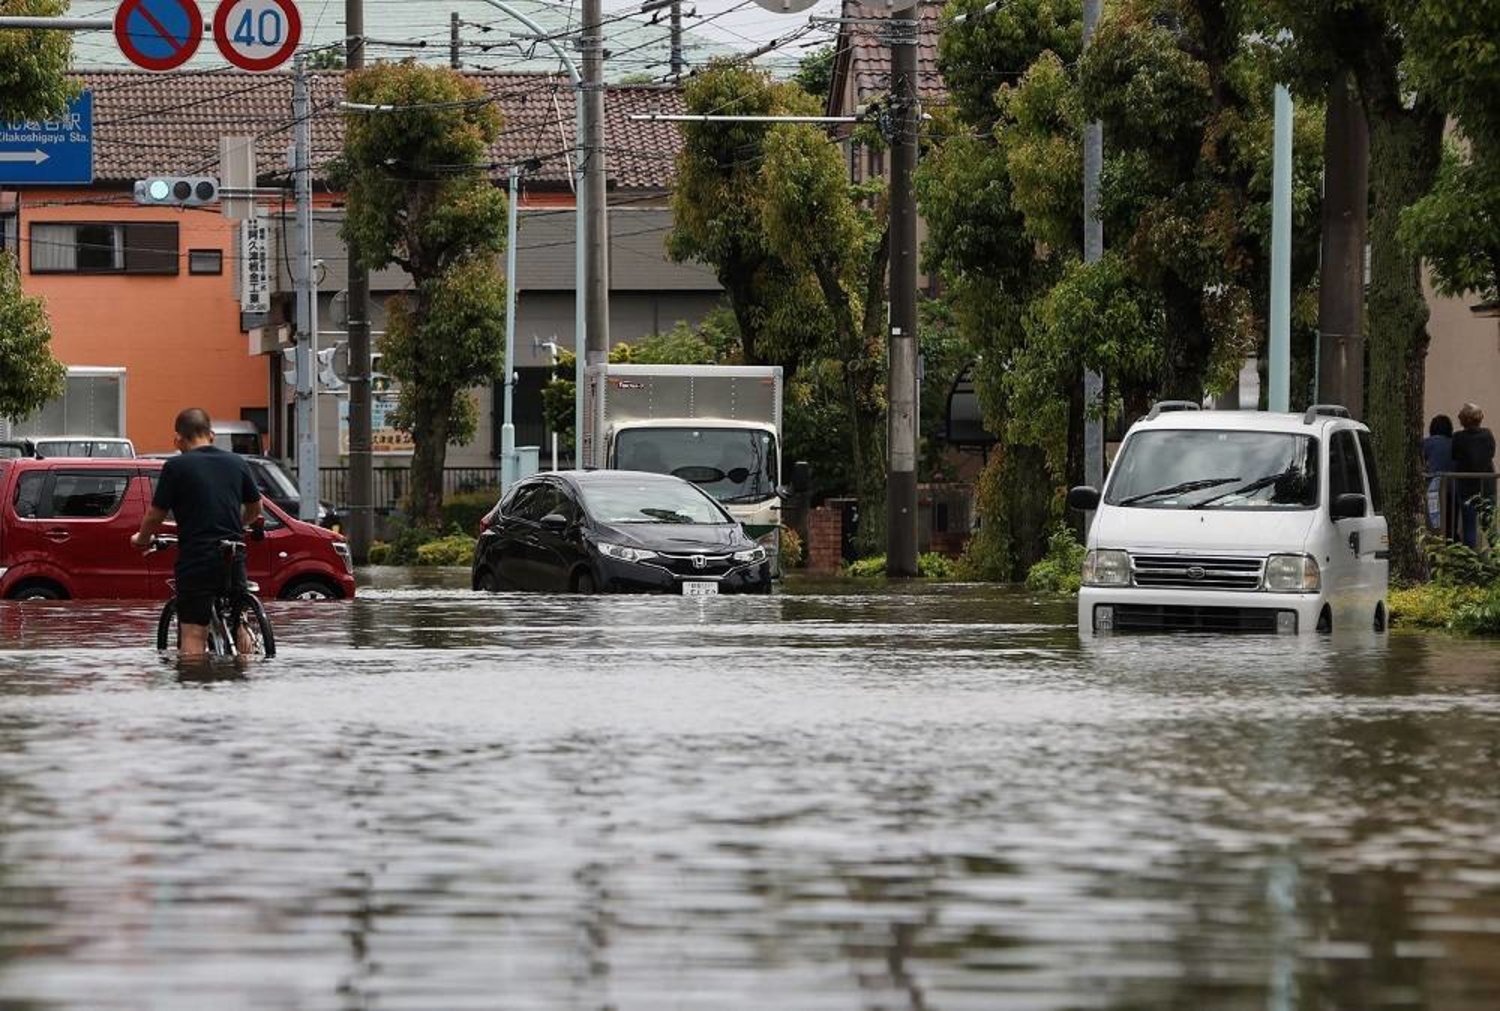 A general view shows a flooded street in Koshigaya, Saitama Prefecture on June 3, 2023, after heavy rains caused by passing Tropical Storm Mawar hit much of the country the day before. (AFP) 